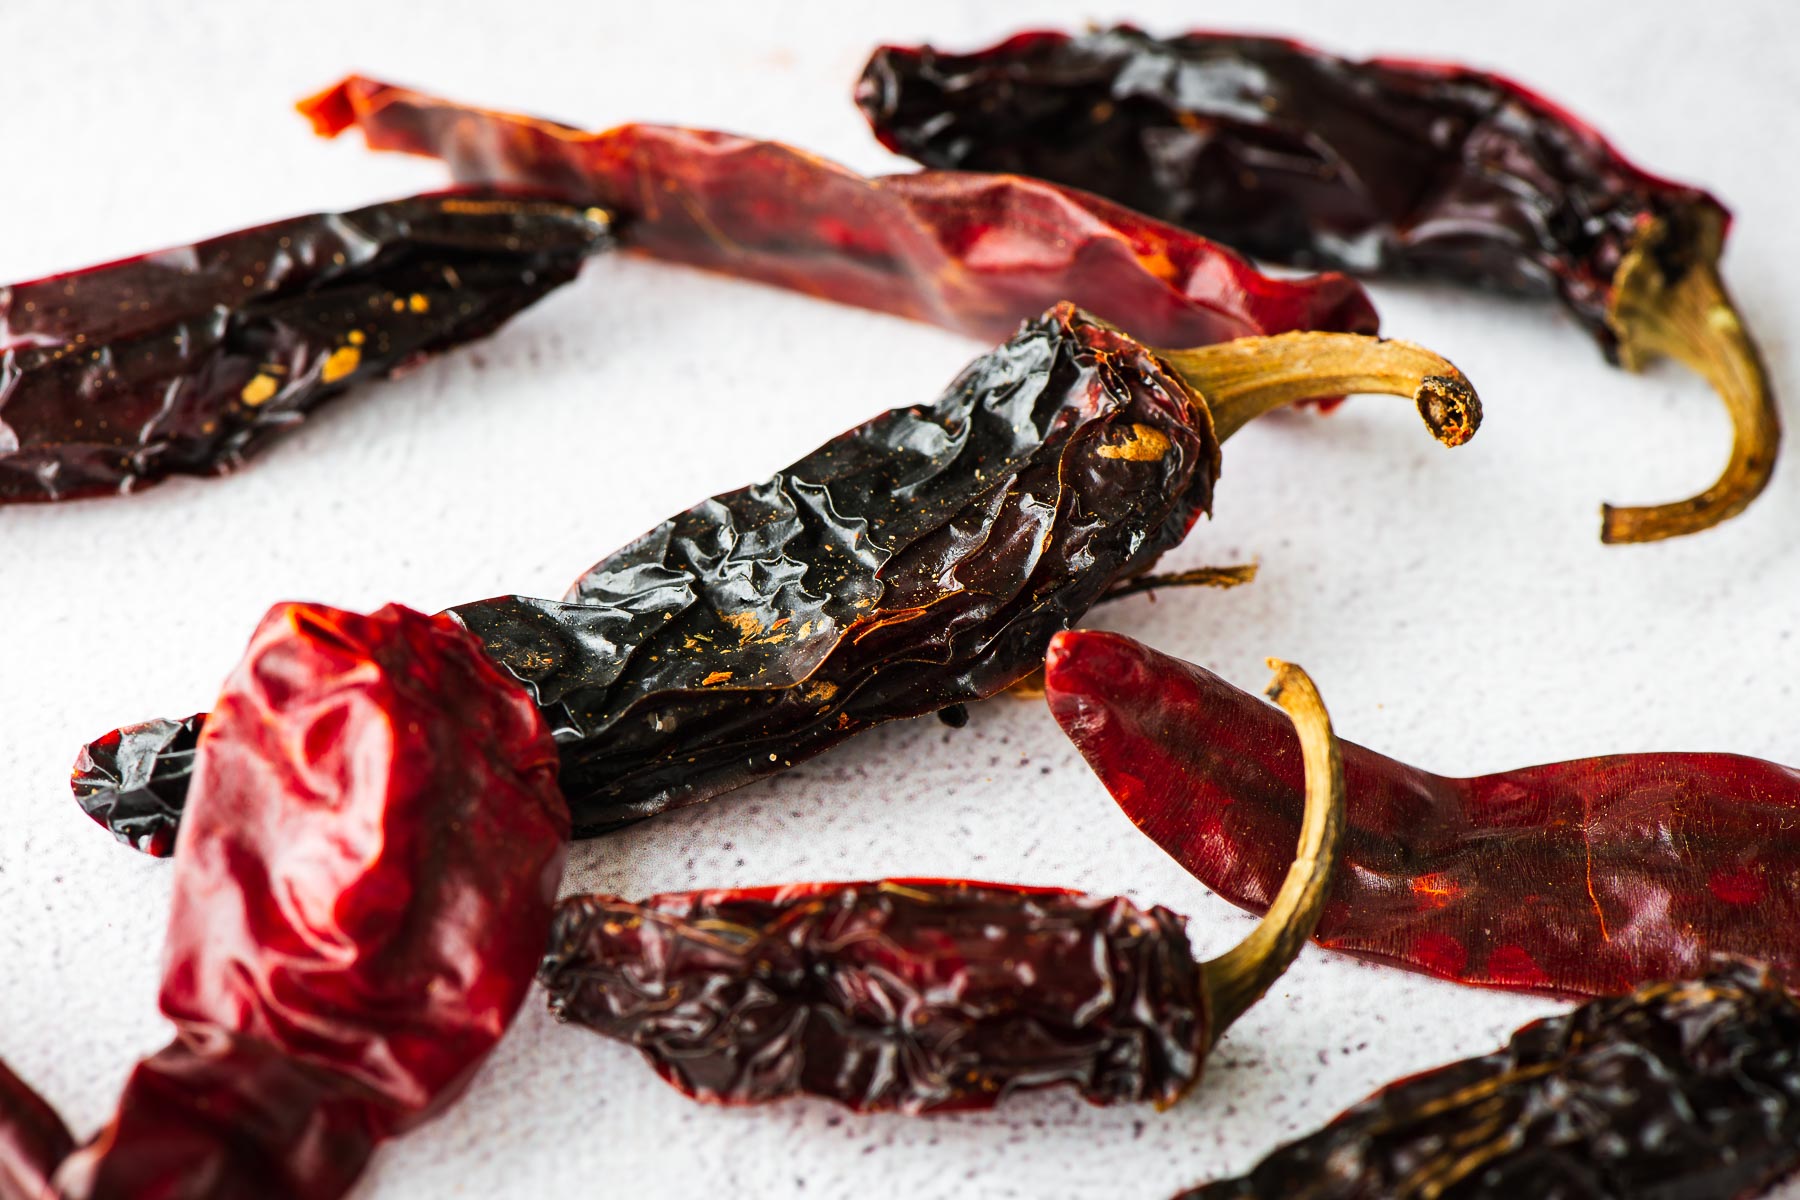 A close-up of dried Jalapeño peppers and red chillies on a concrete background.